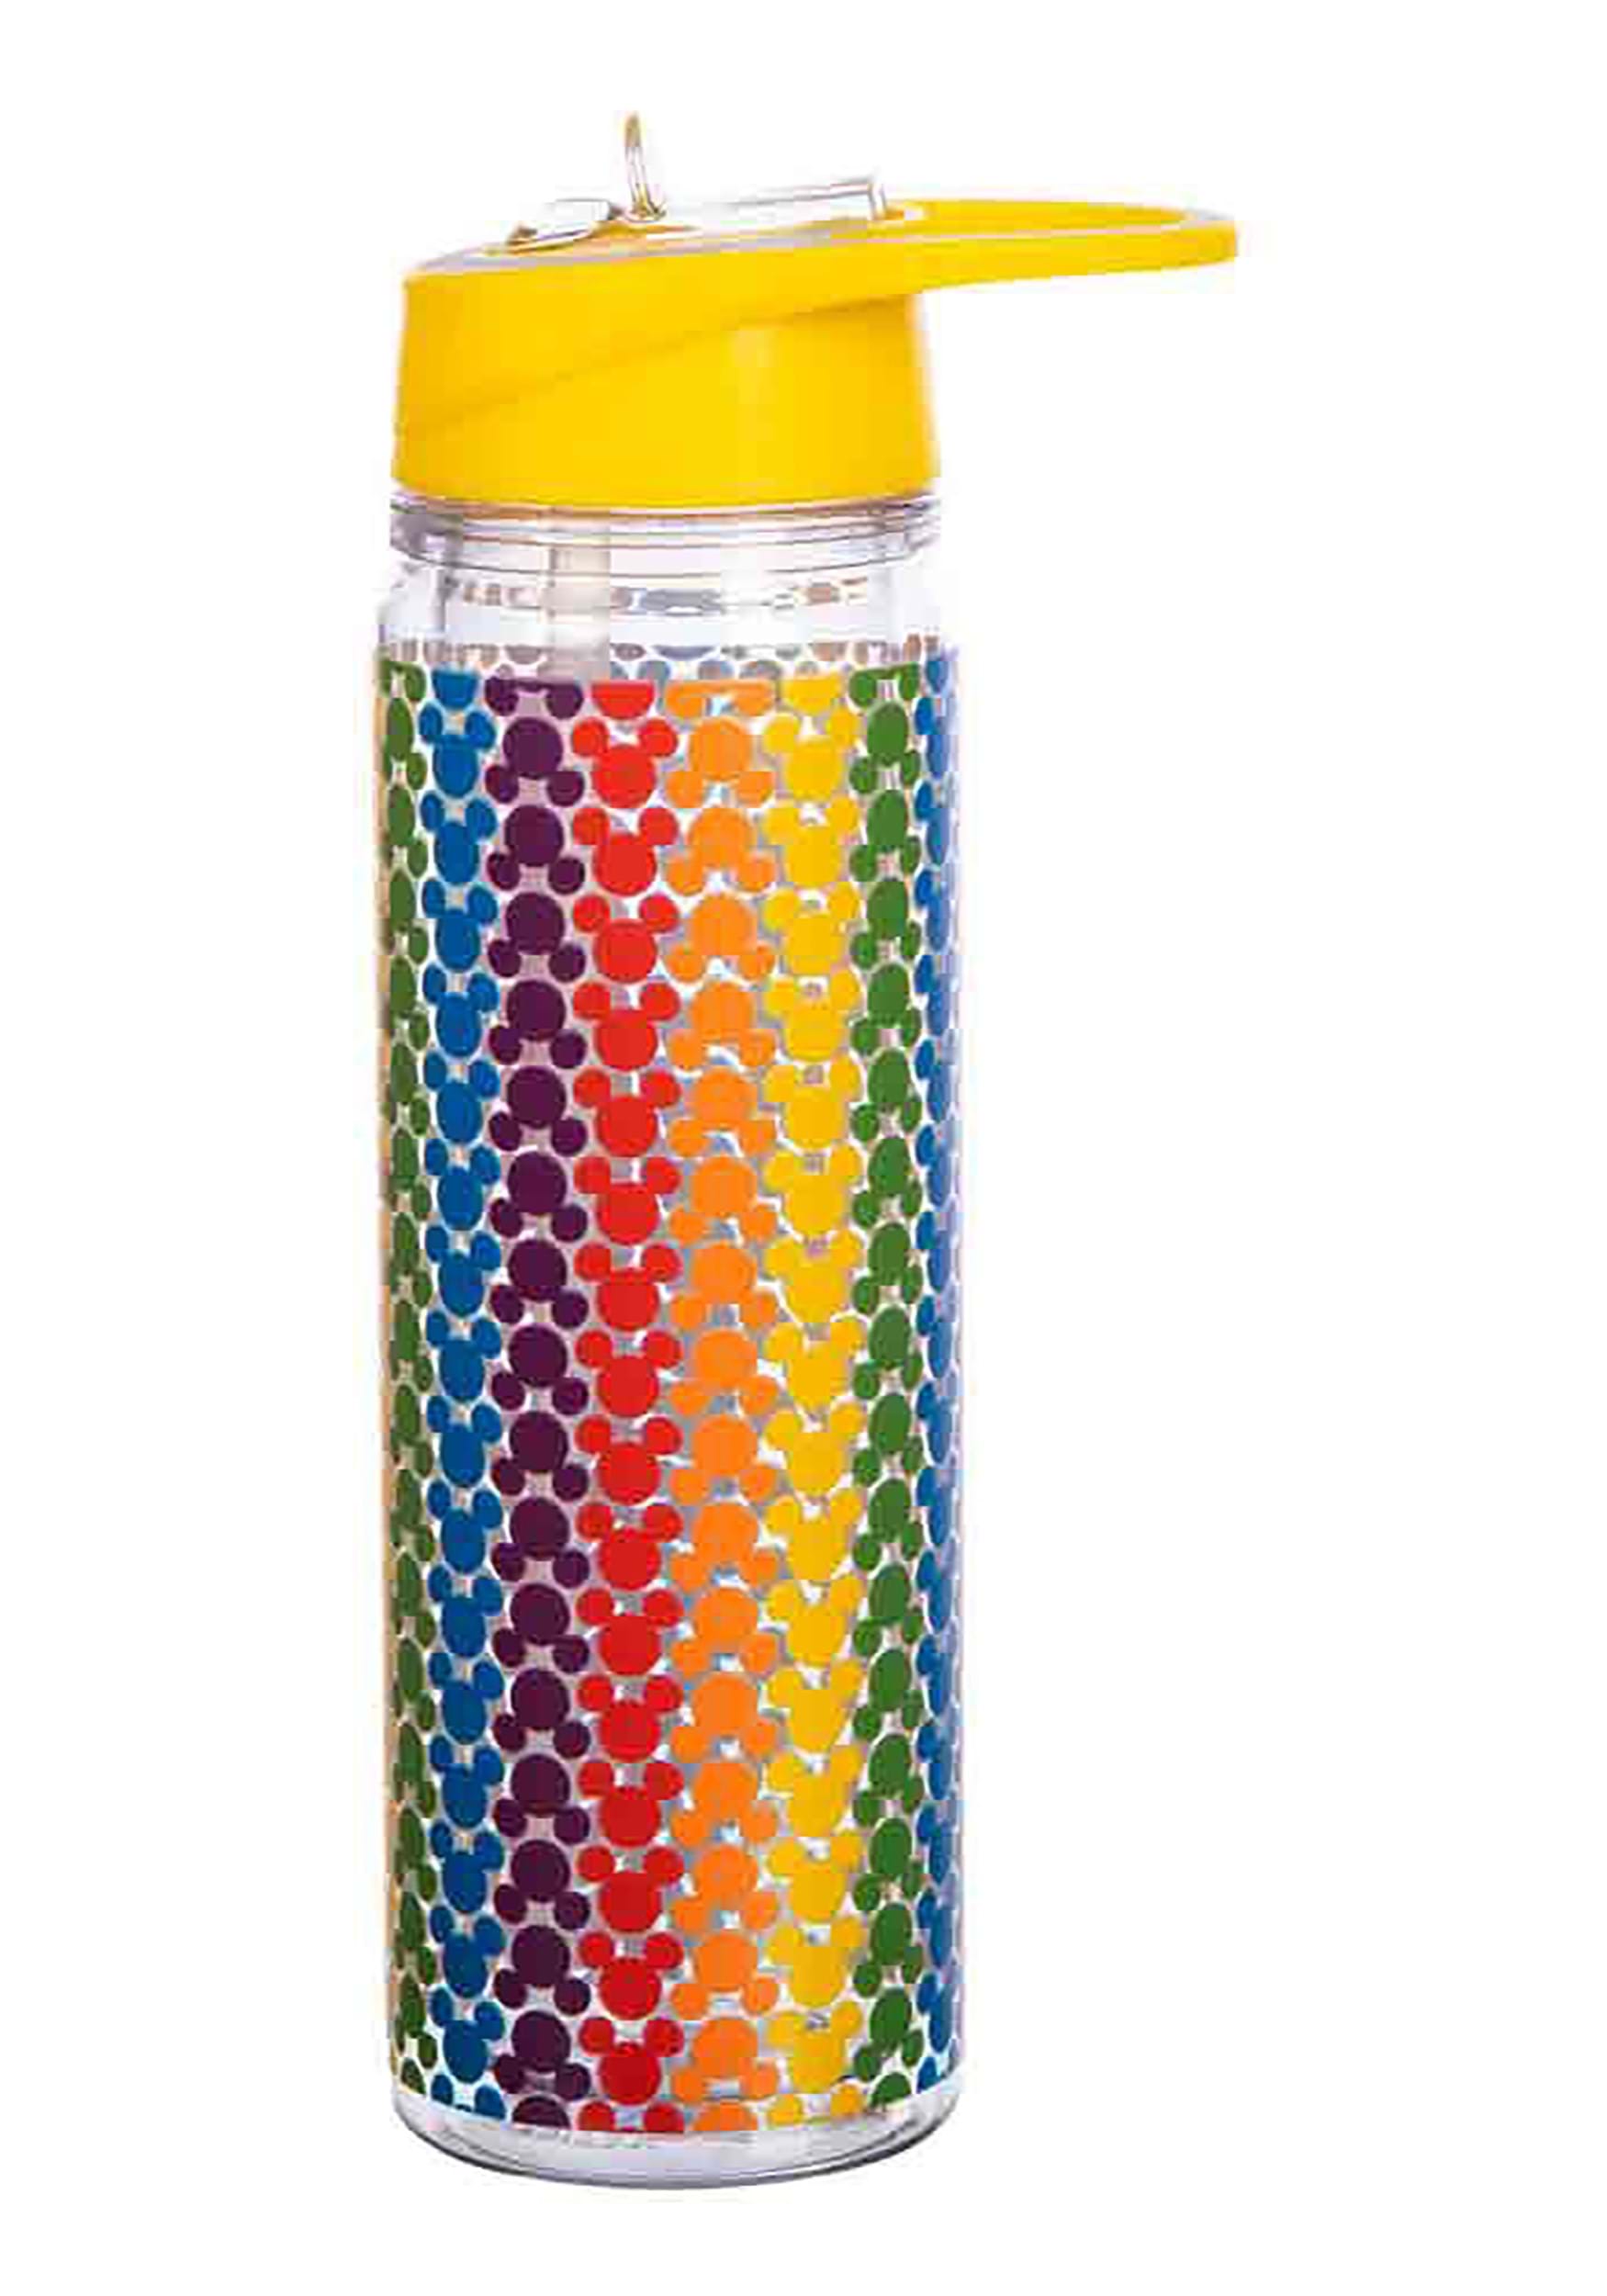 https://images.fun.com/products/79116/2-1-203804/disney-mickey-mouse-pride-rainbow-double-wall-water-bottle-1.jpg